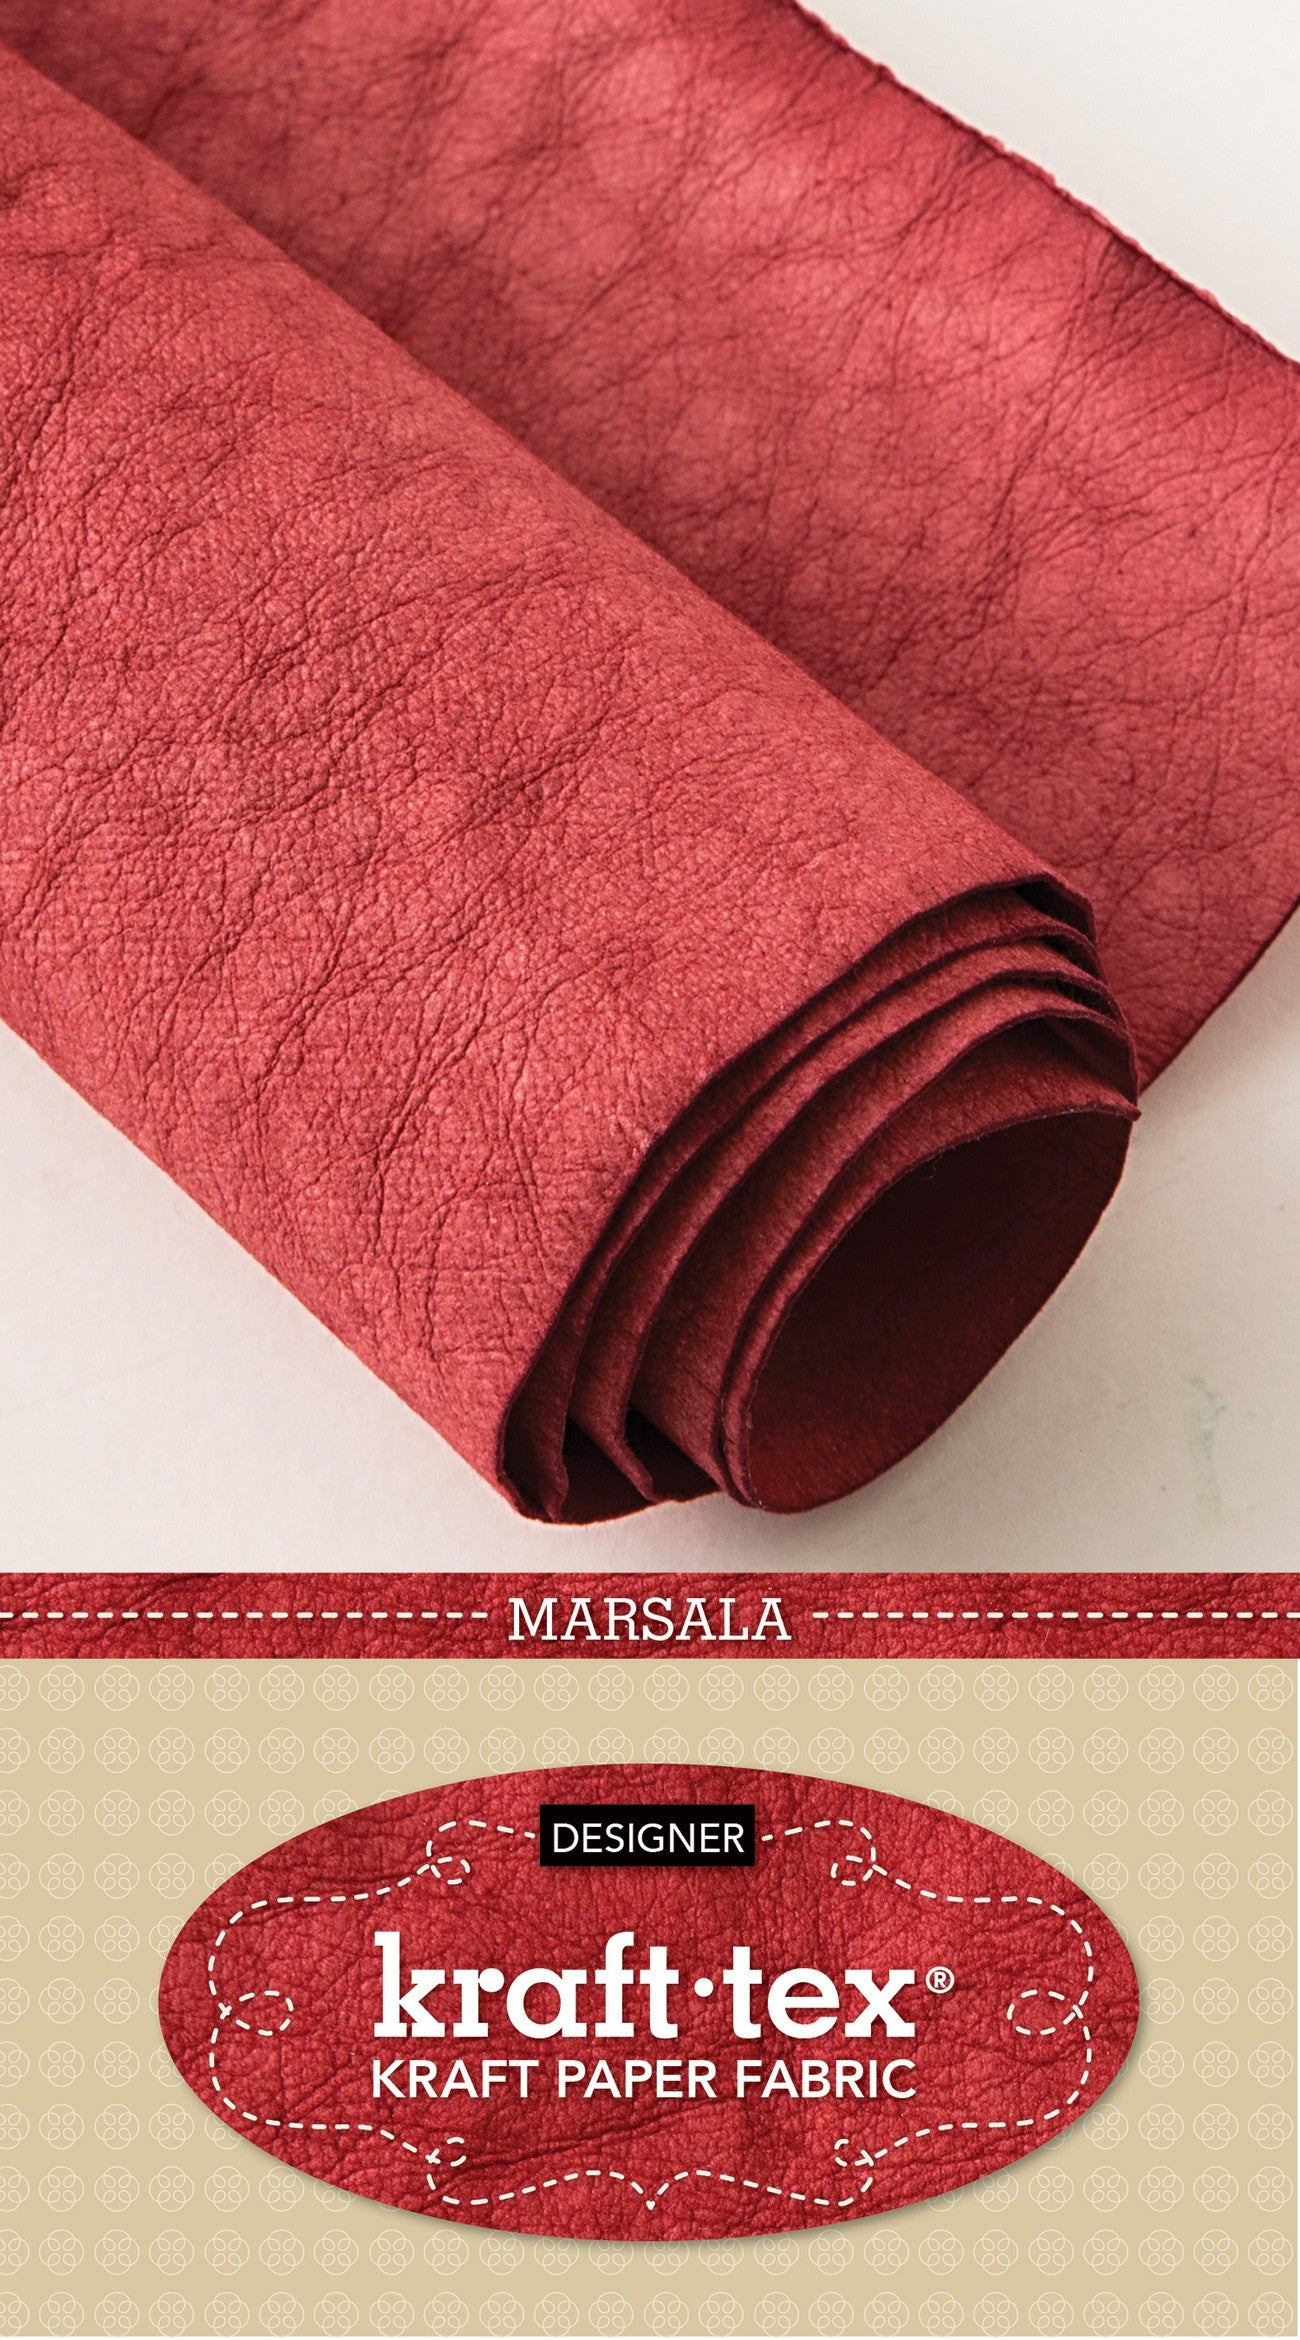 Kraft-Tex Roll, Designer Marsala, 18.5 Inches x 28.5 Inches Hand-Dyed Prewashed Paper Fabric